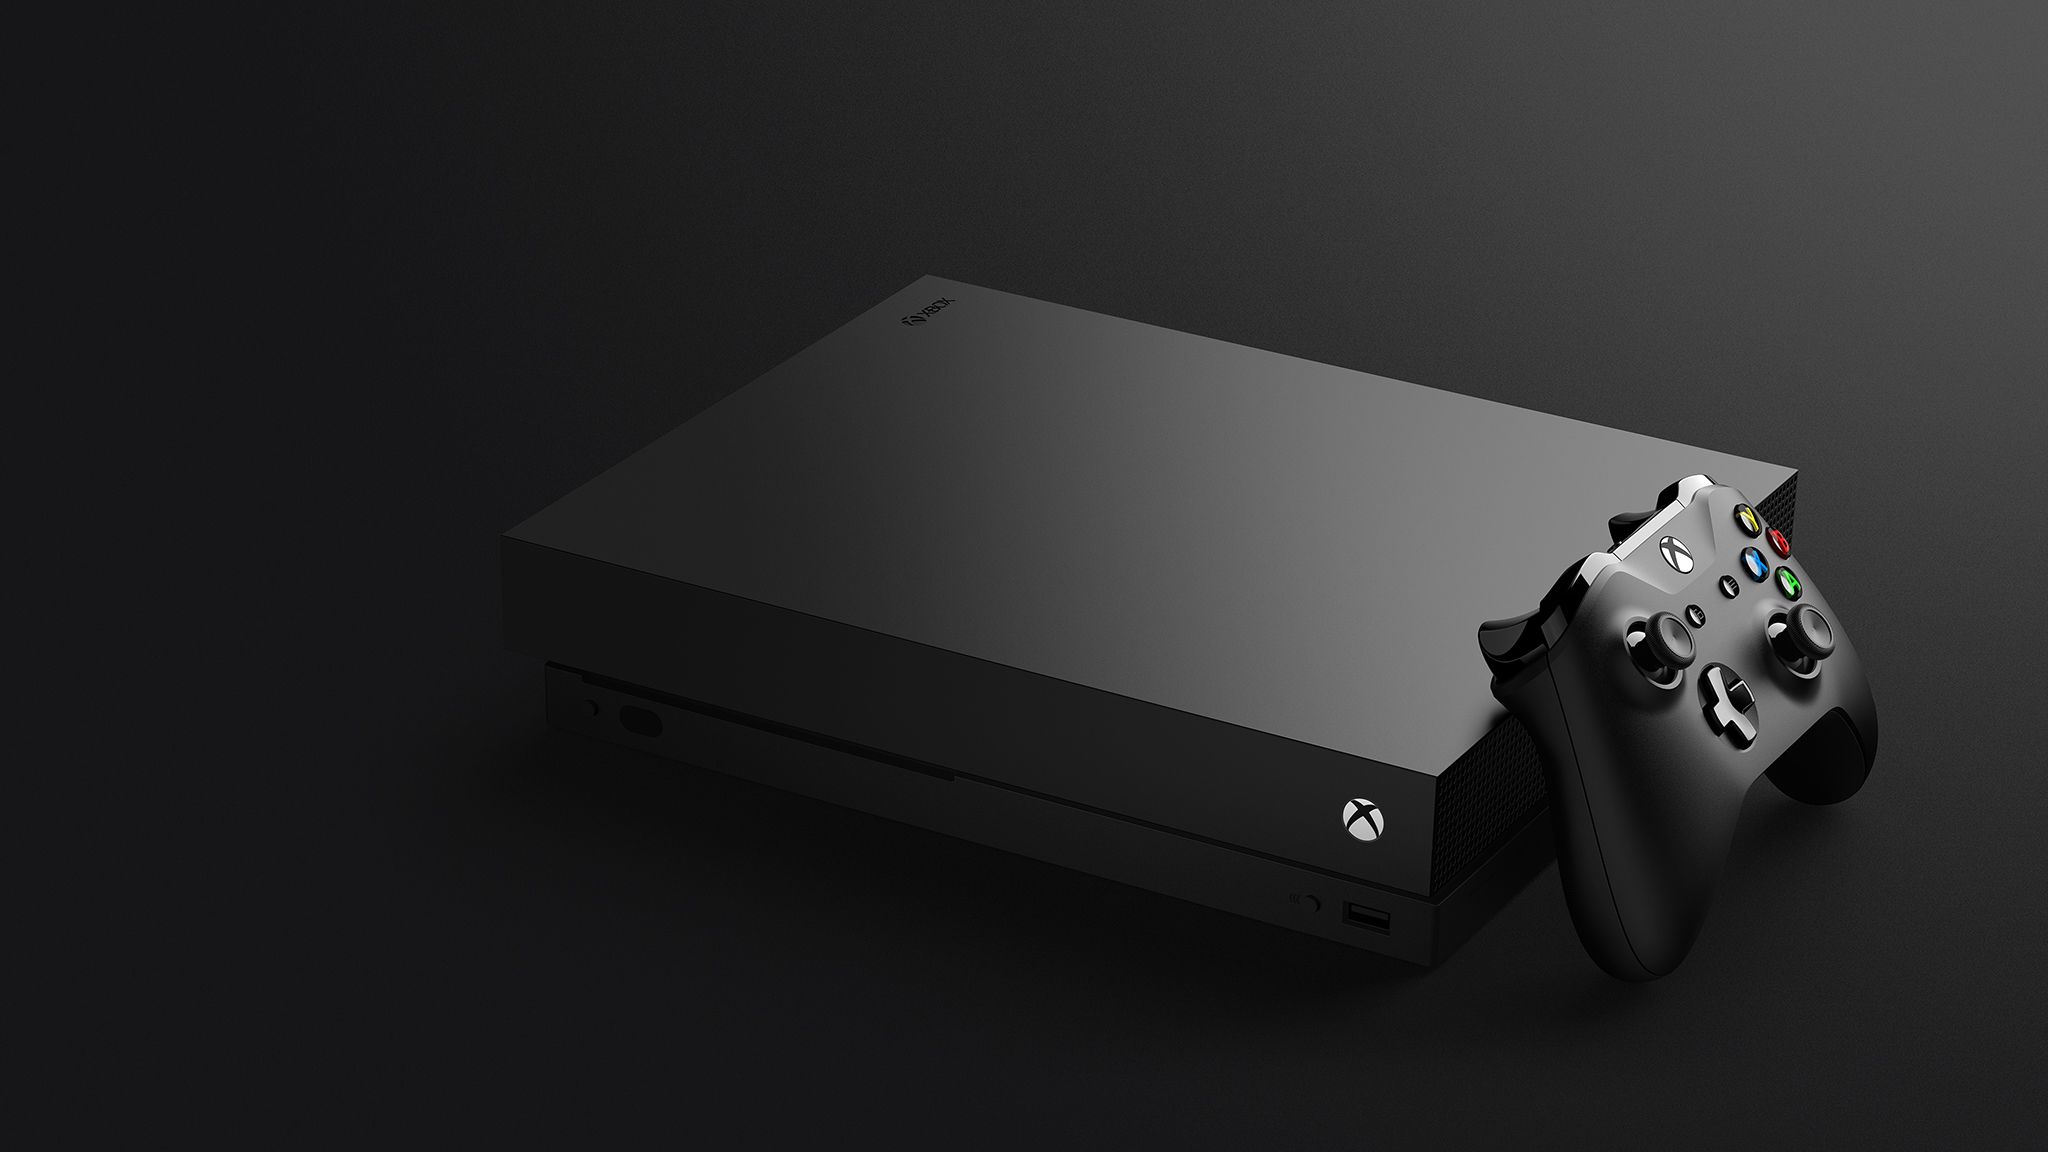 Microsoft announces Xbox One X as 'world's most powerful console